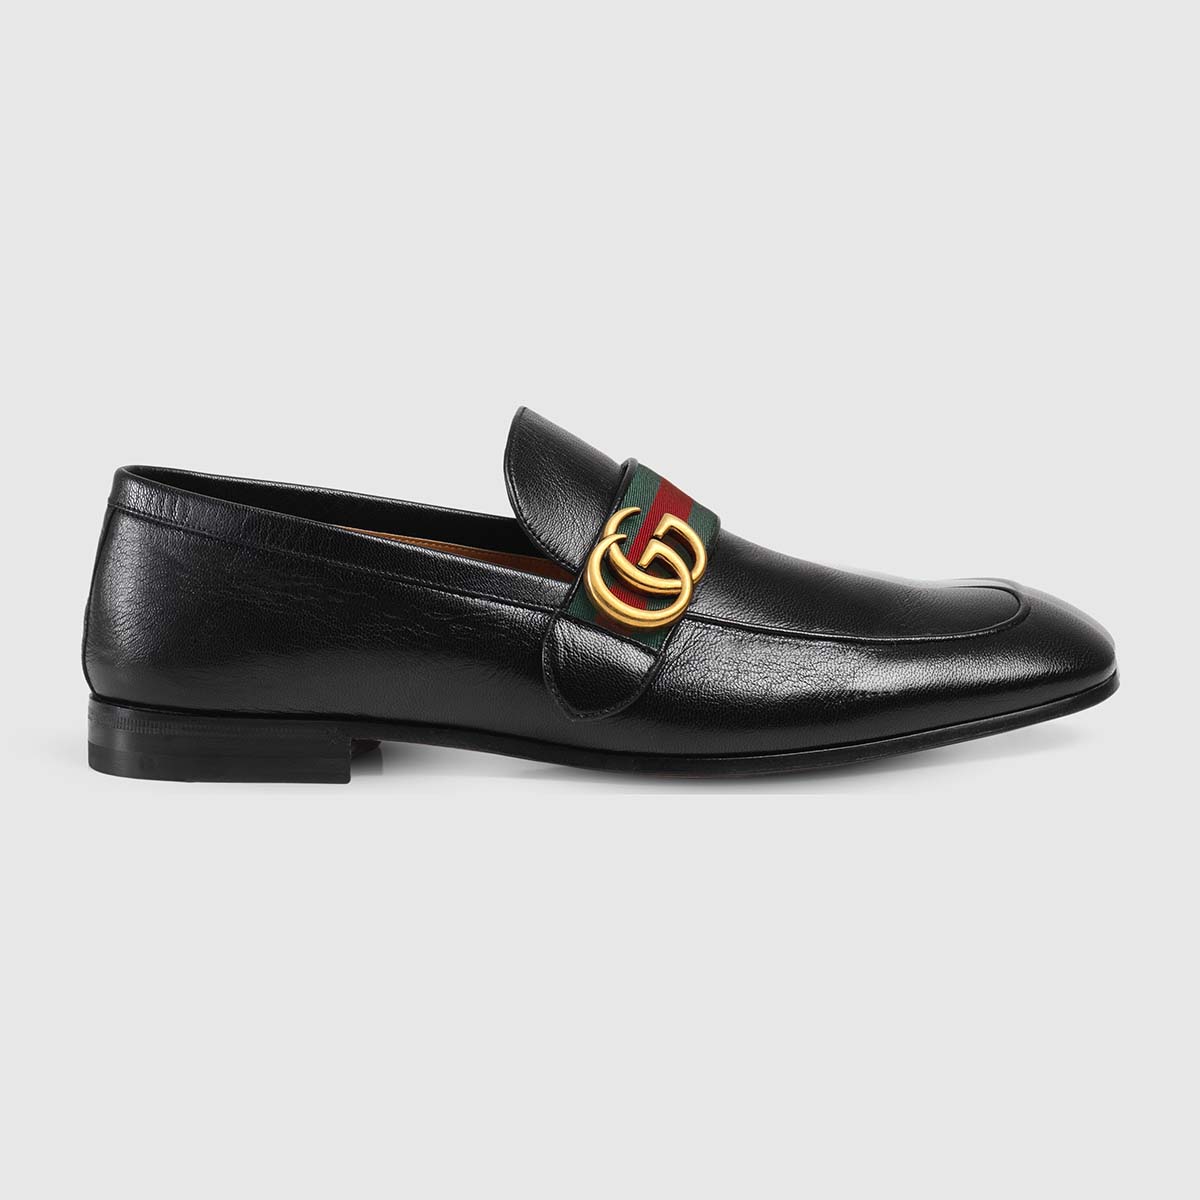 Gucci Men Leather Loafer with GG Web Shoes-Black - LULUX